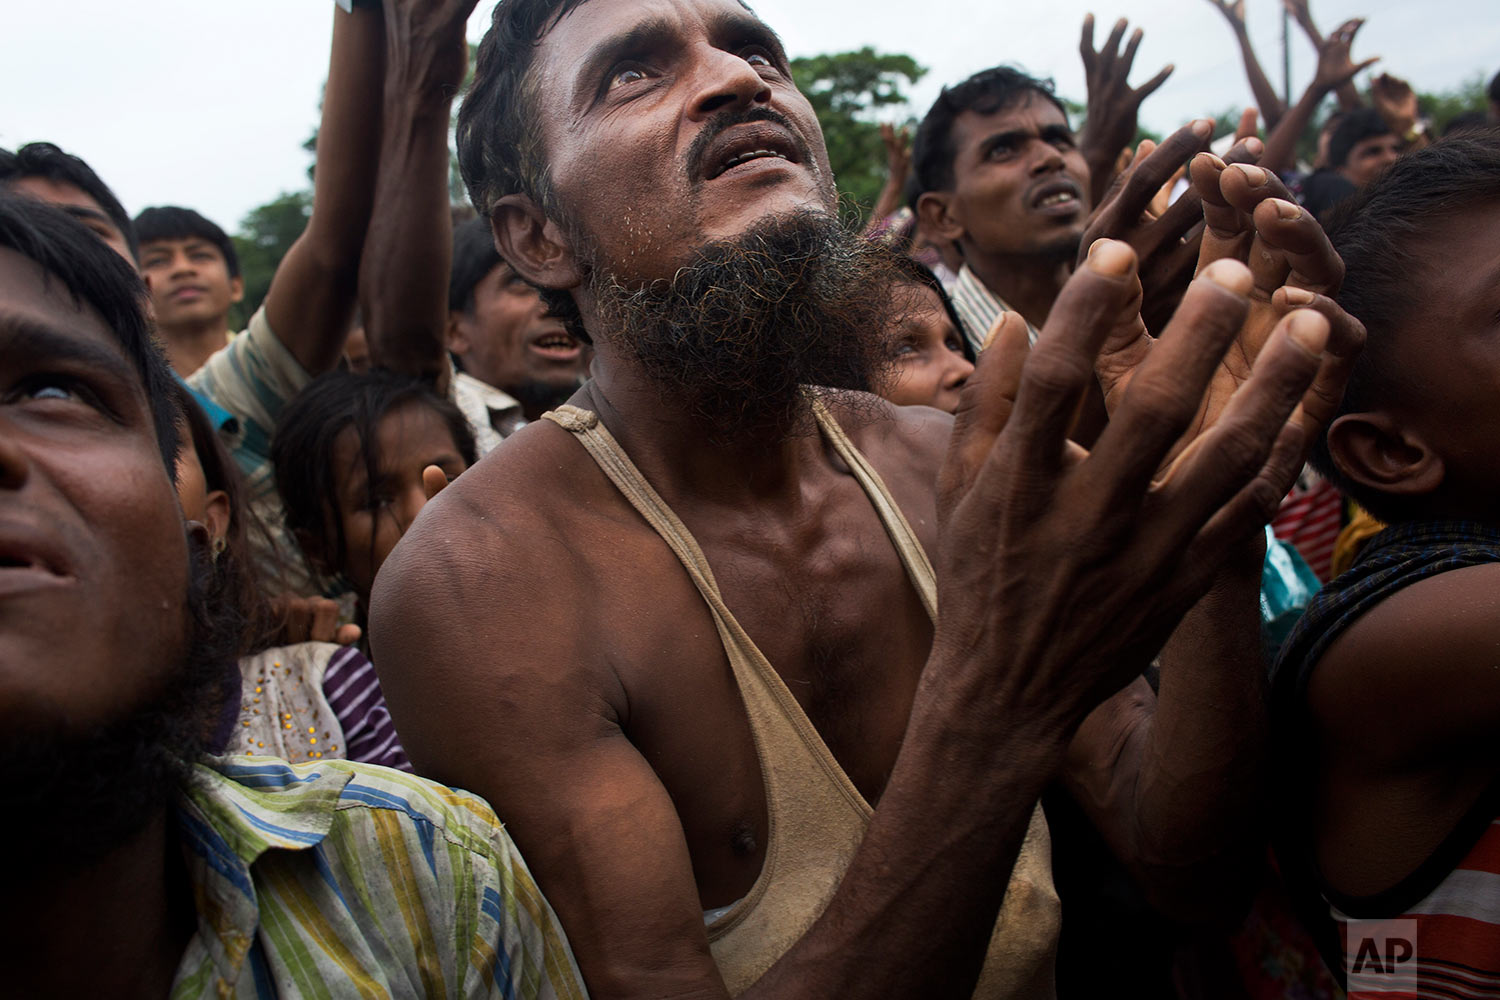 A Rohingya man stretches his arms out for food distributed by local volunteers, with bags of puffed rice stuffed into his vest at Kutupalong, Bangladesh, Saturday, Sept. 9, 2017. (AP Photo/Bernat Armangue)